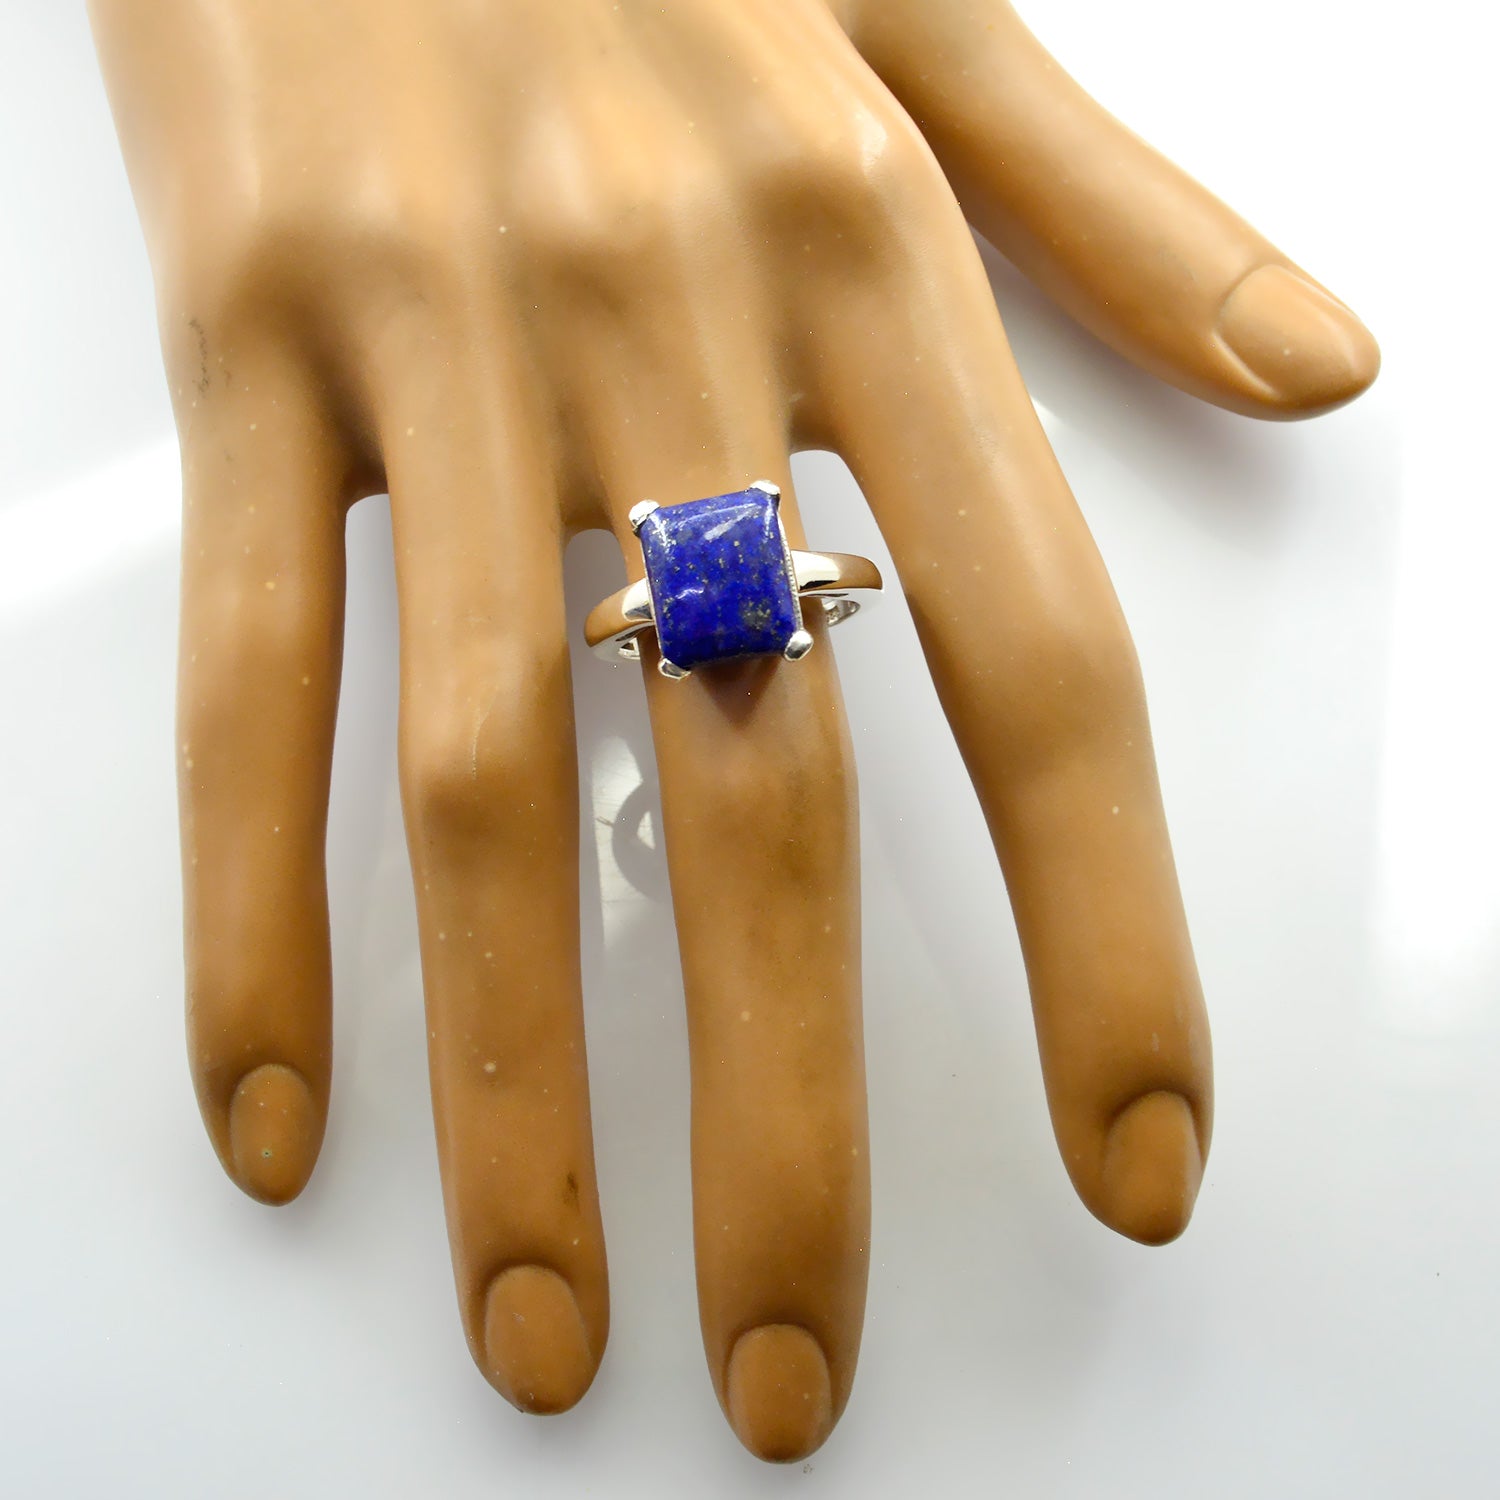 Appealing Stone Lapis Lazuli Solid Silver Ring Southwestern Jewelry